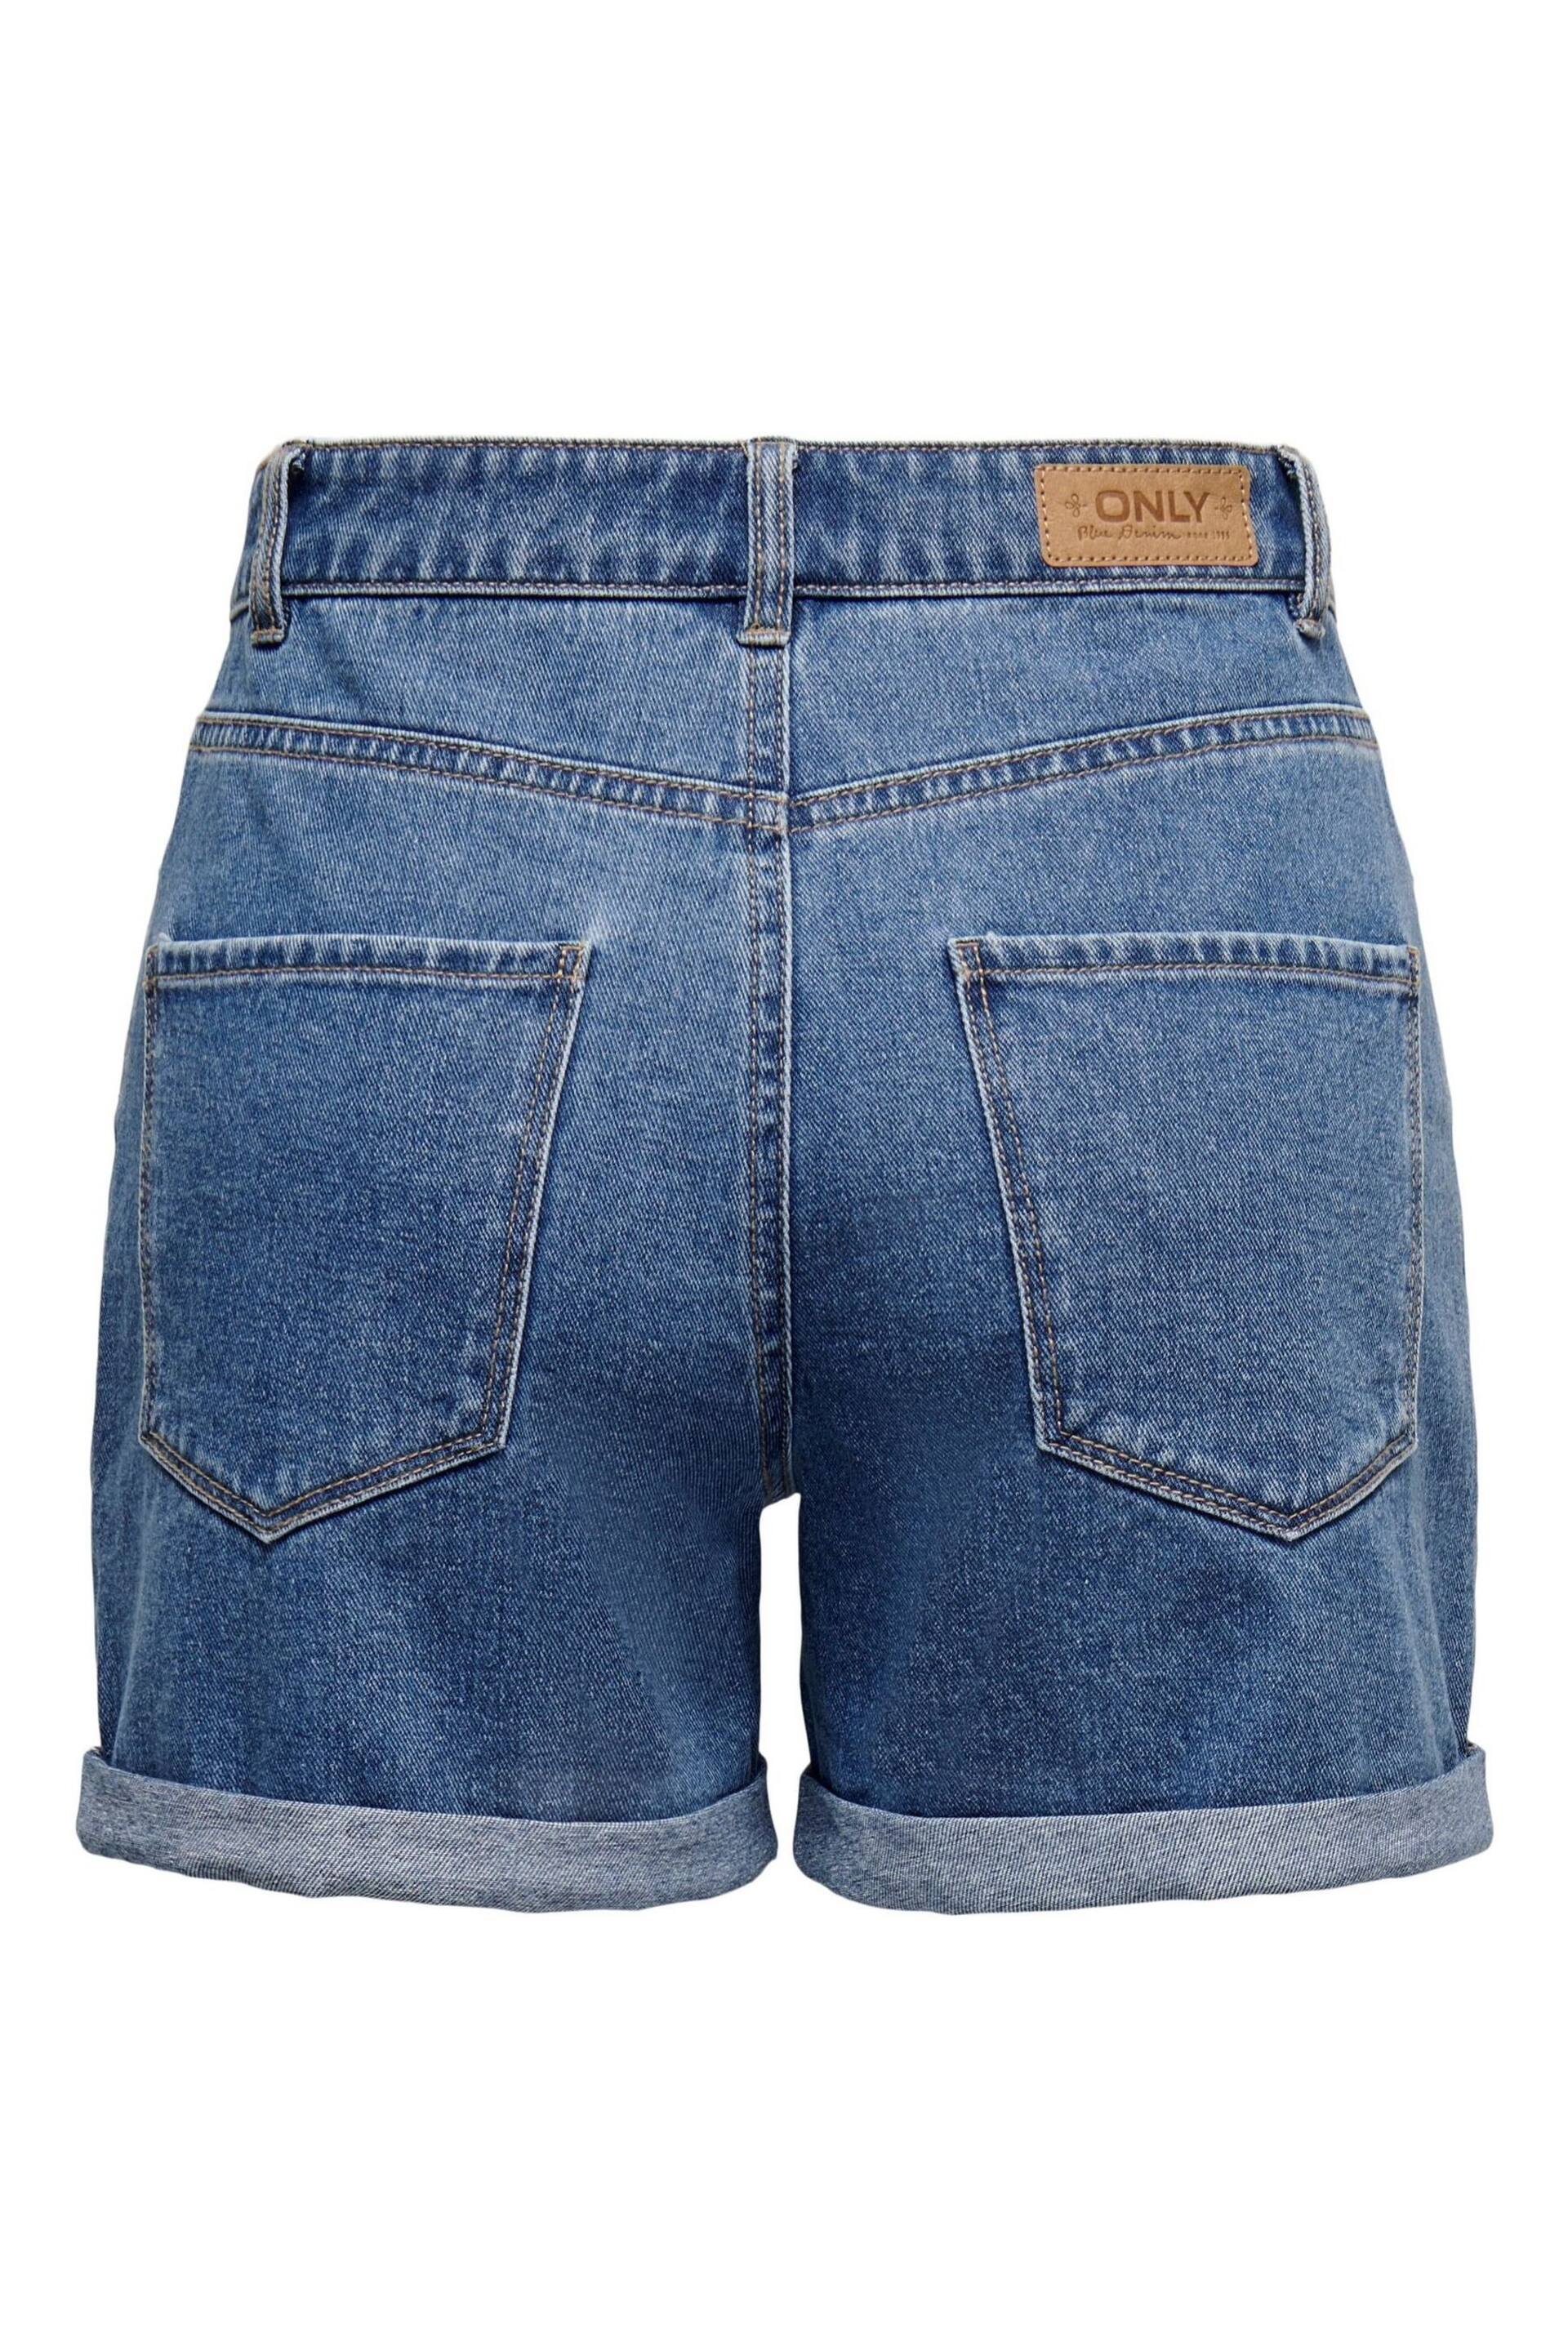 ONLY Mid Blue High Waisted Denim Mom Shorts - Image 7 of 7